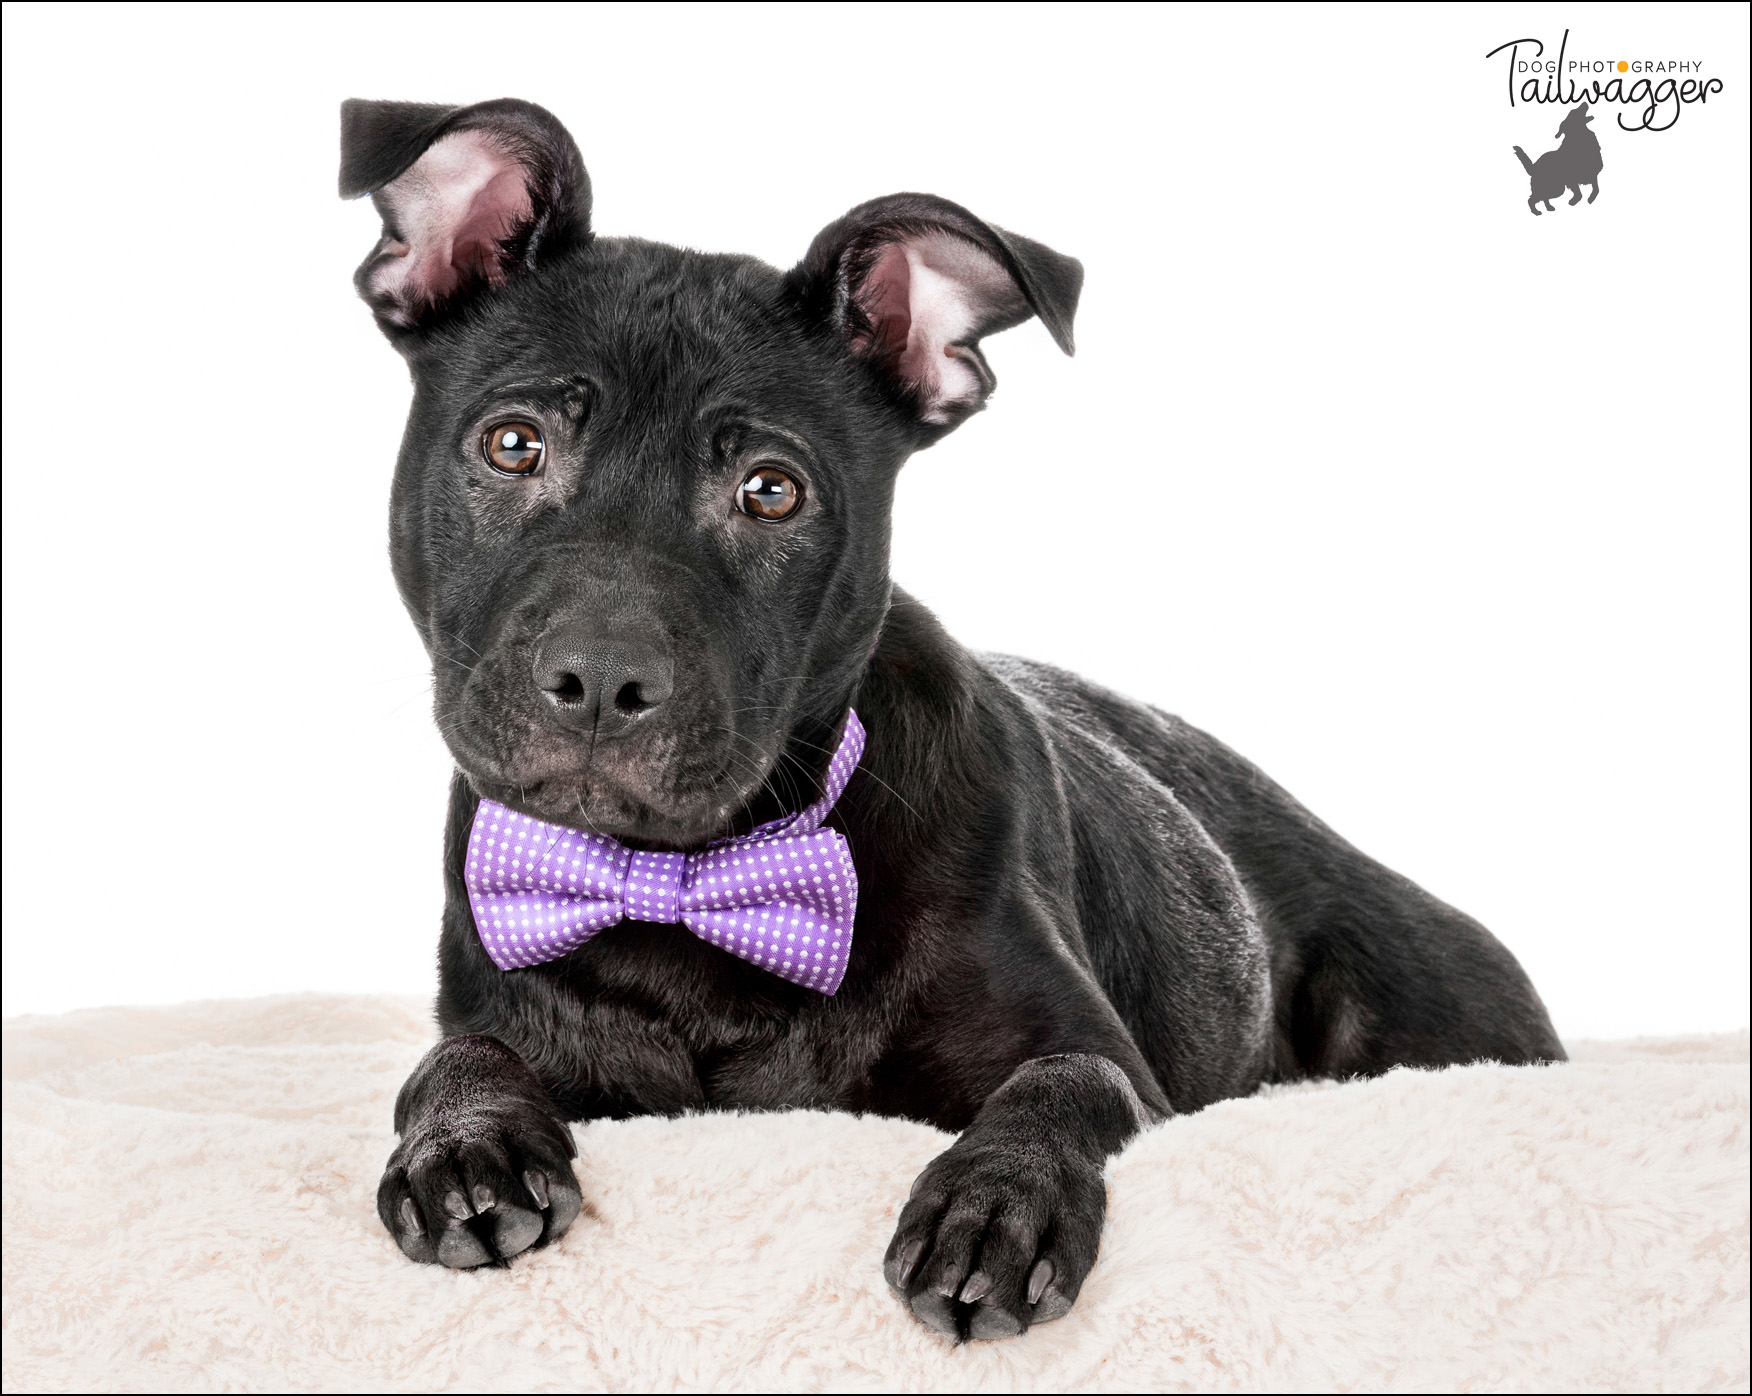 A black lab, beagle, pit bull mix puppy with a purple bow tie on sits in a dog bed.